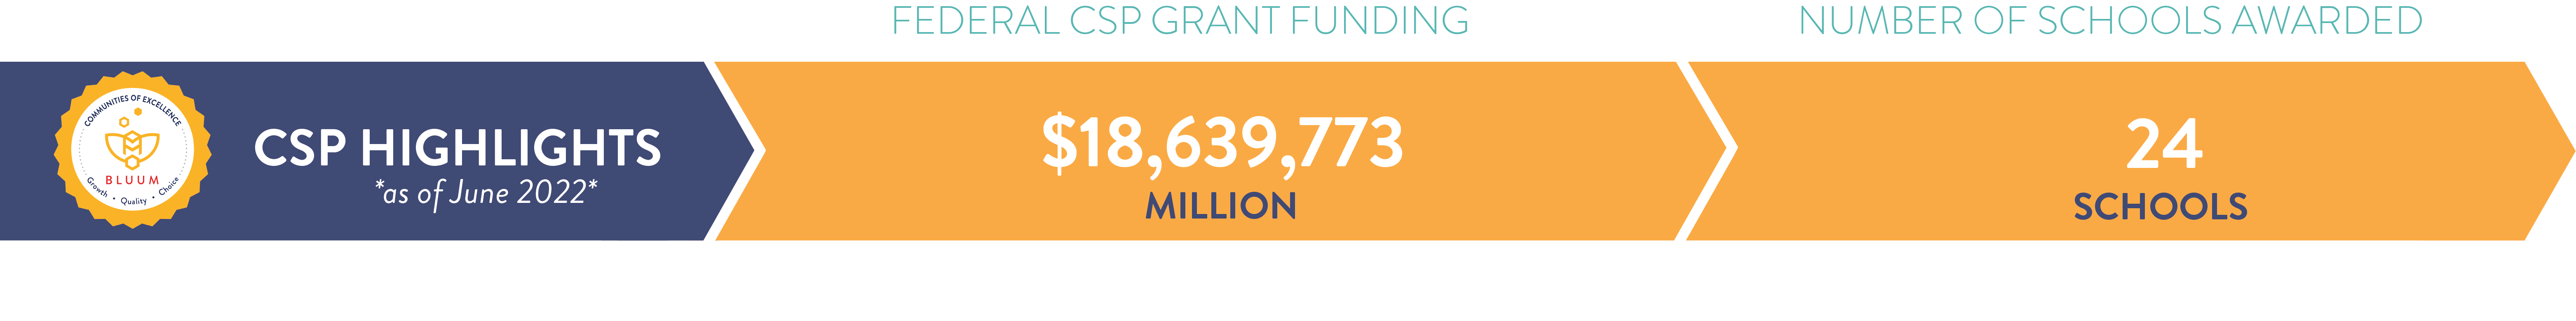 CSP Highlights as of June 2022; Federal CSP Grant Funding $18,639,773; Number of Schools Awarded 24